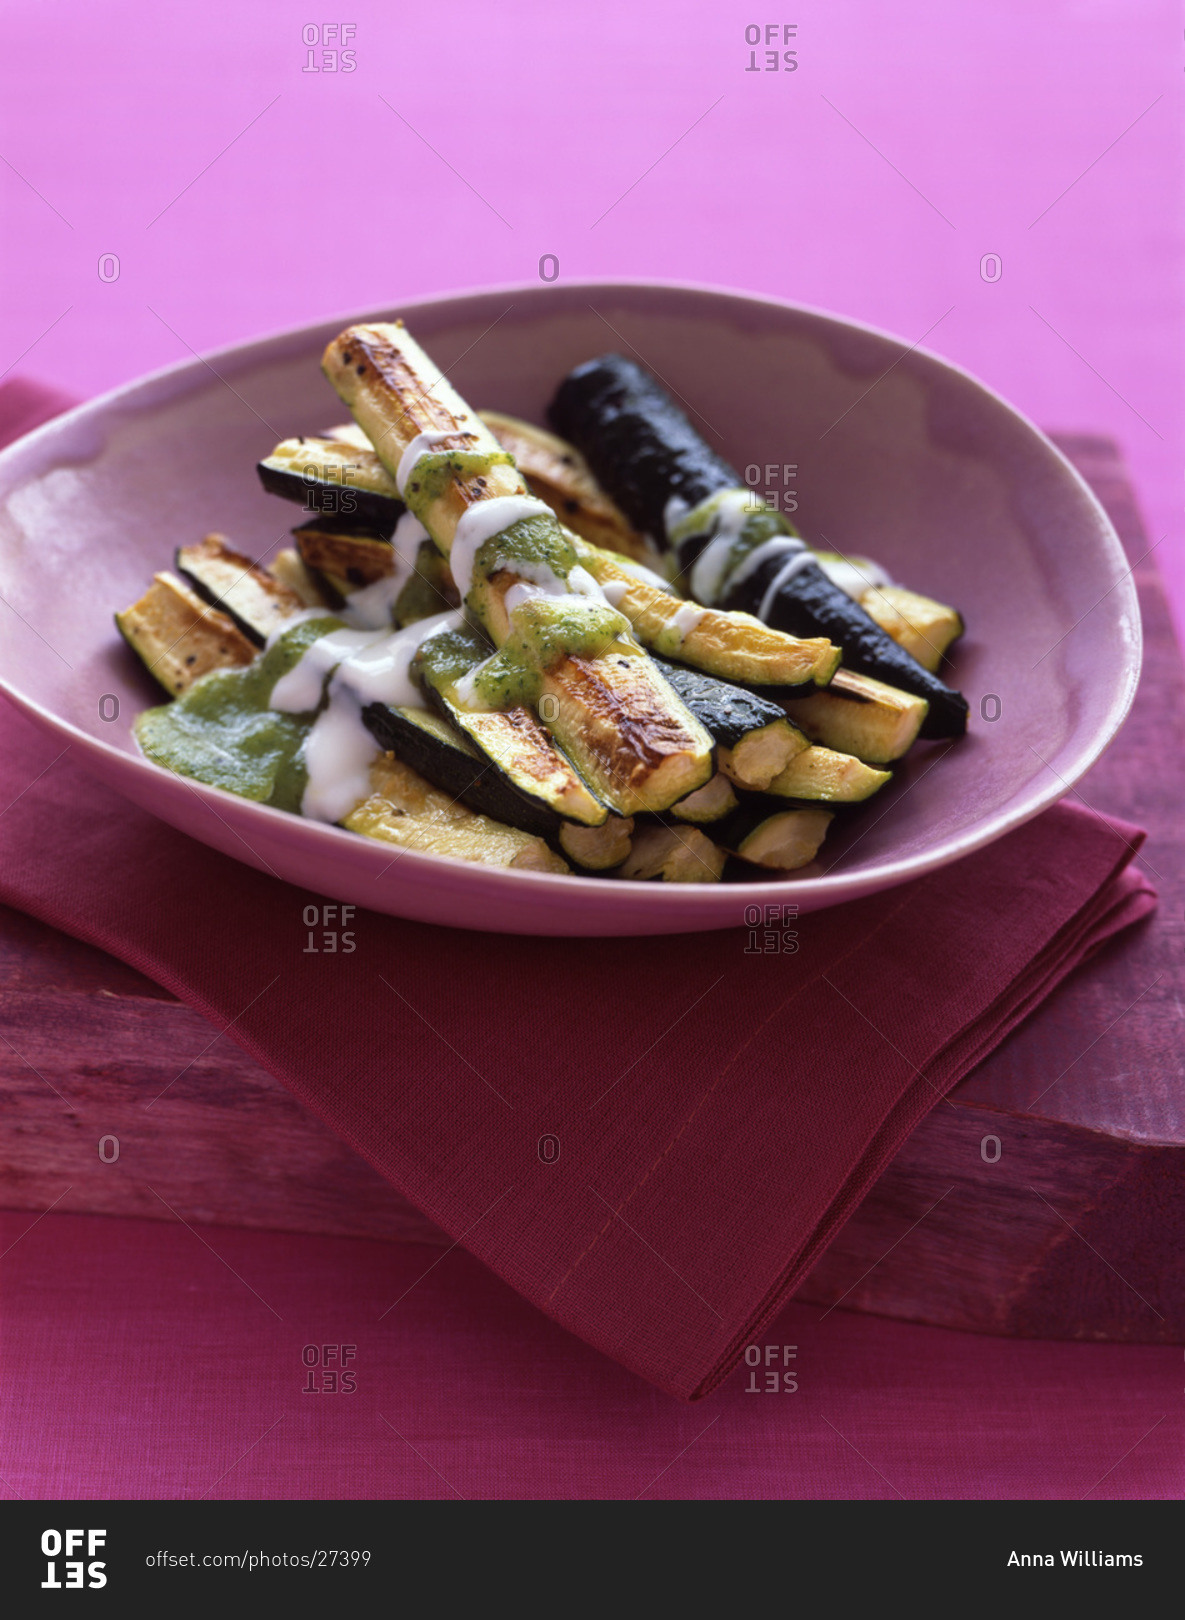 Roasted zucchini sticks drizzled with sauce for an appetizer or side dish